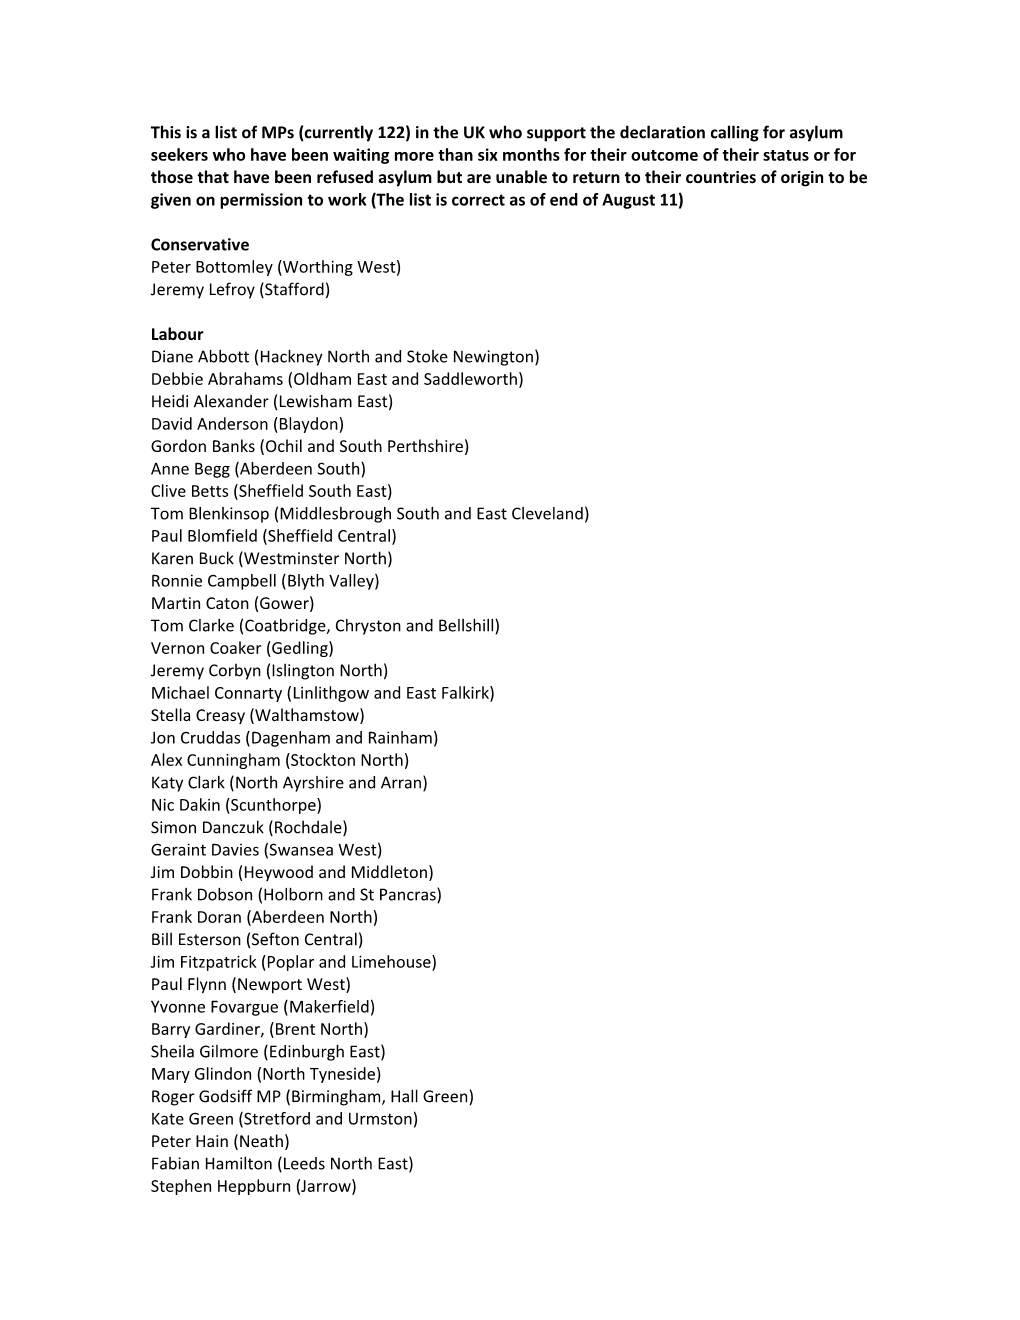 Mps Who Have Signed the Declaration Supporting Permission to Work